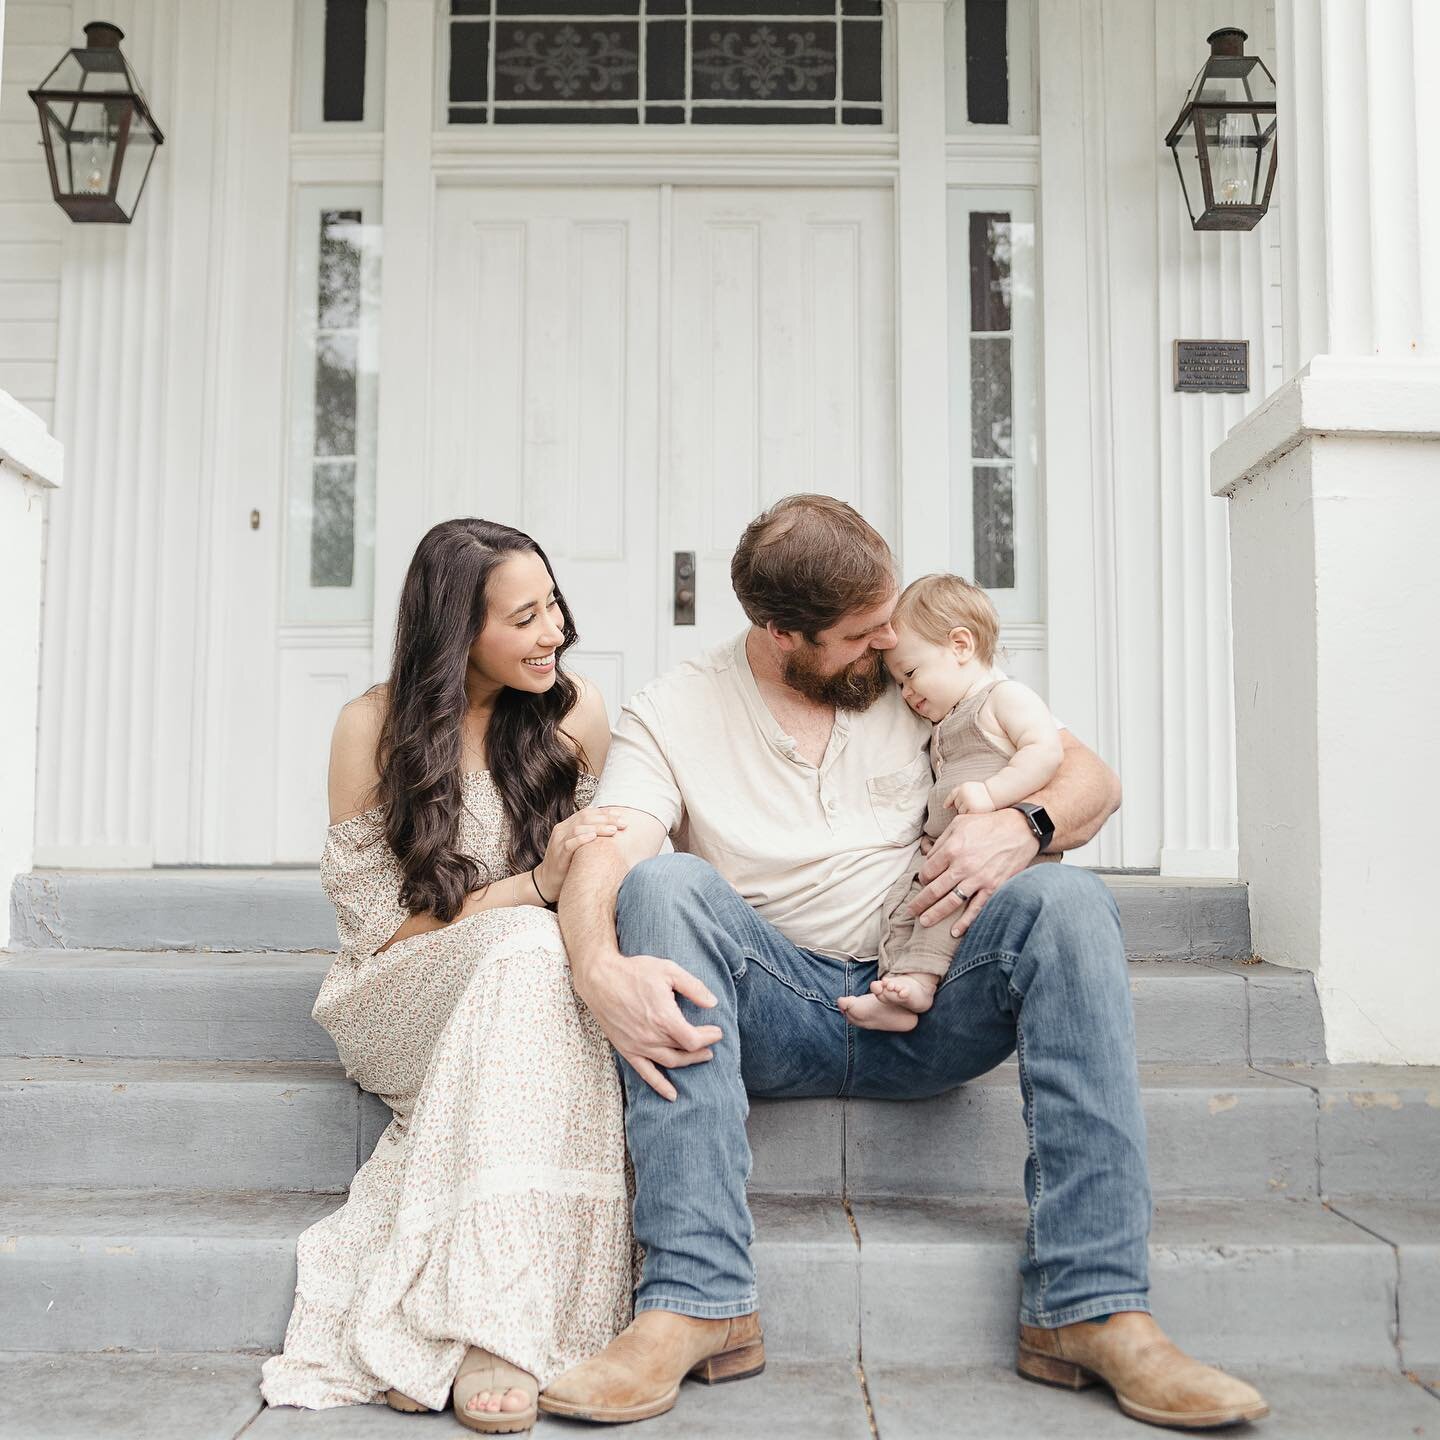 Now that they&rsquo;re launched, I can finally share the photos we took at @thetrotterhouse in Quitman. Omg 🥺😭😍 This was our first time doing photos as a family since Gabriel was born and @jpickcreatives hit the nail on the head. I&rsquo;ve alread